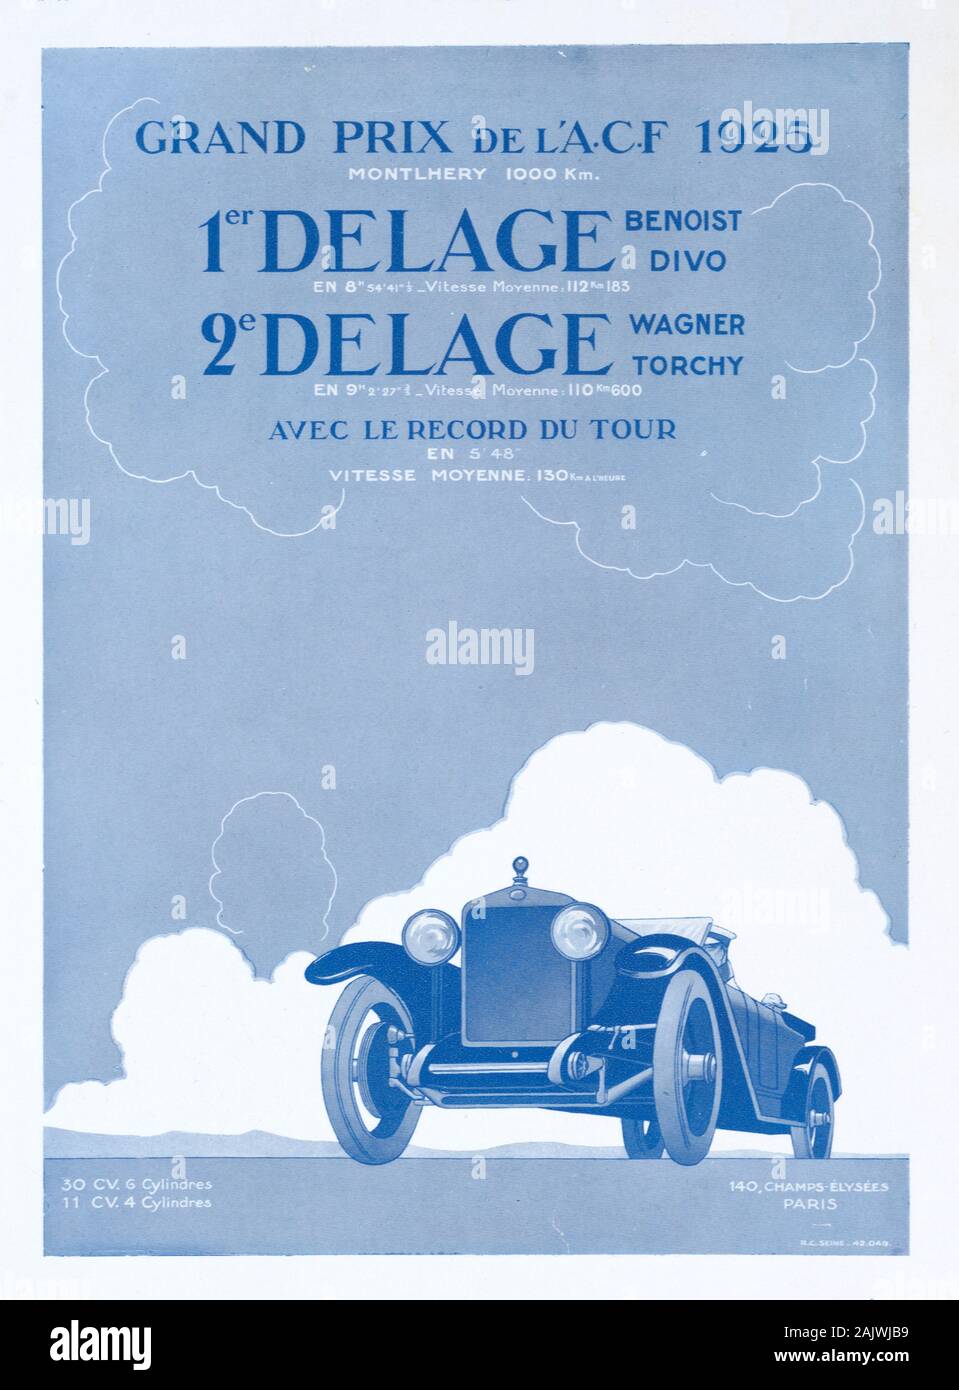 Old Advert, Vintage Advert or Publicity for the Luxury French Racing Car Delage 12-Cylinder 2-litre Type 2 LCV, which won the 1925 Grand Prix of  Montlhéry near Paris France. Advert from 1926 Stock Photo